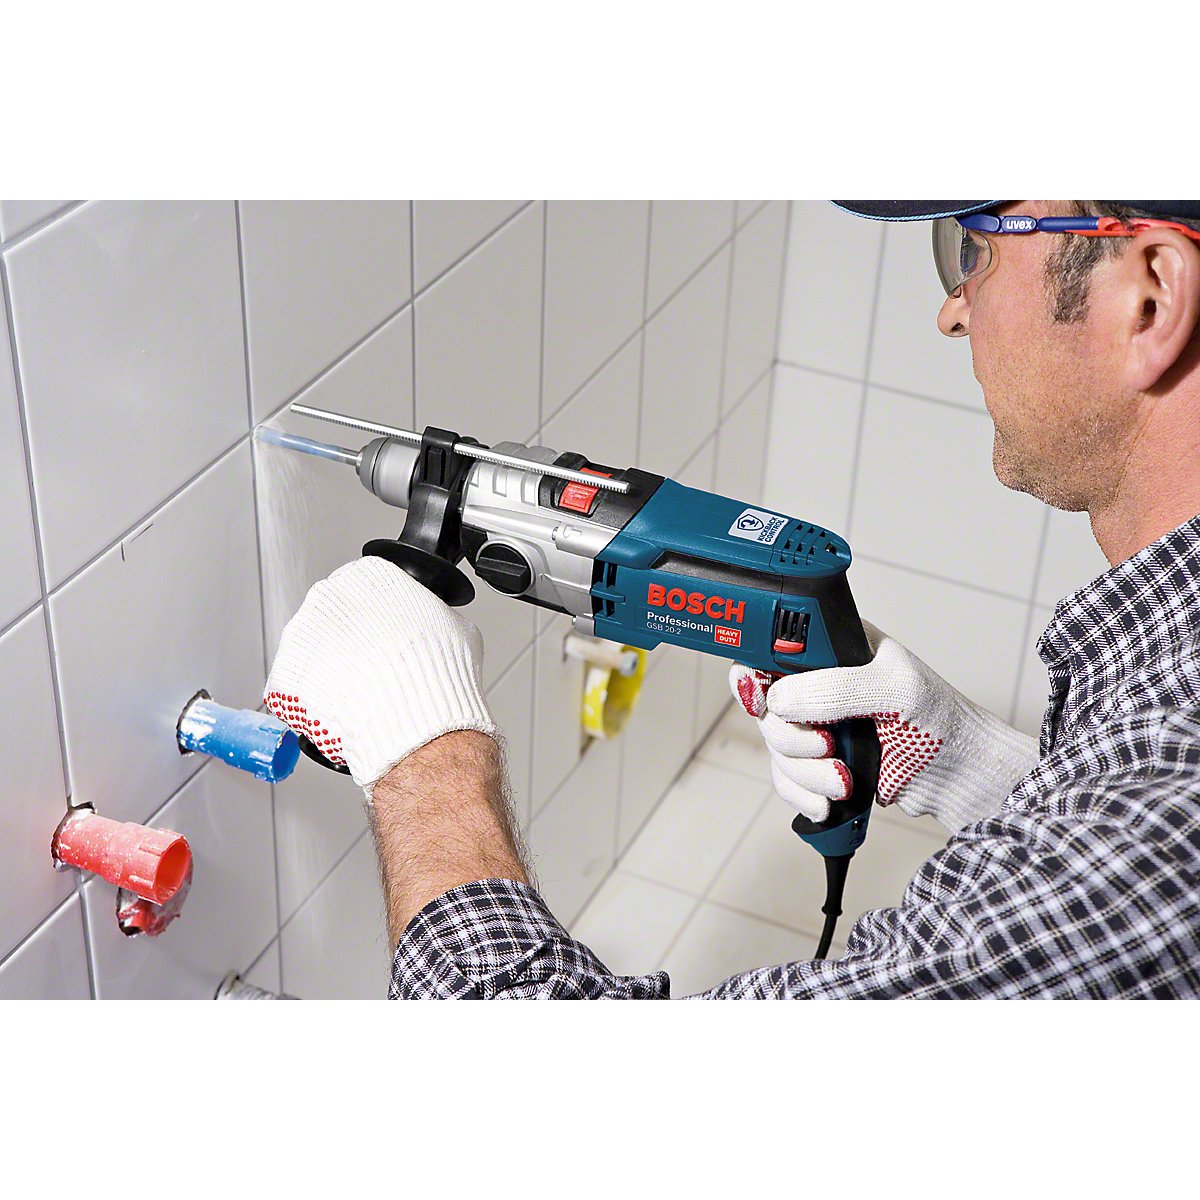 Klopboormachine GSB 20-2 Professional – Bosch (Productafbeelding 2)-1